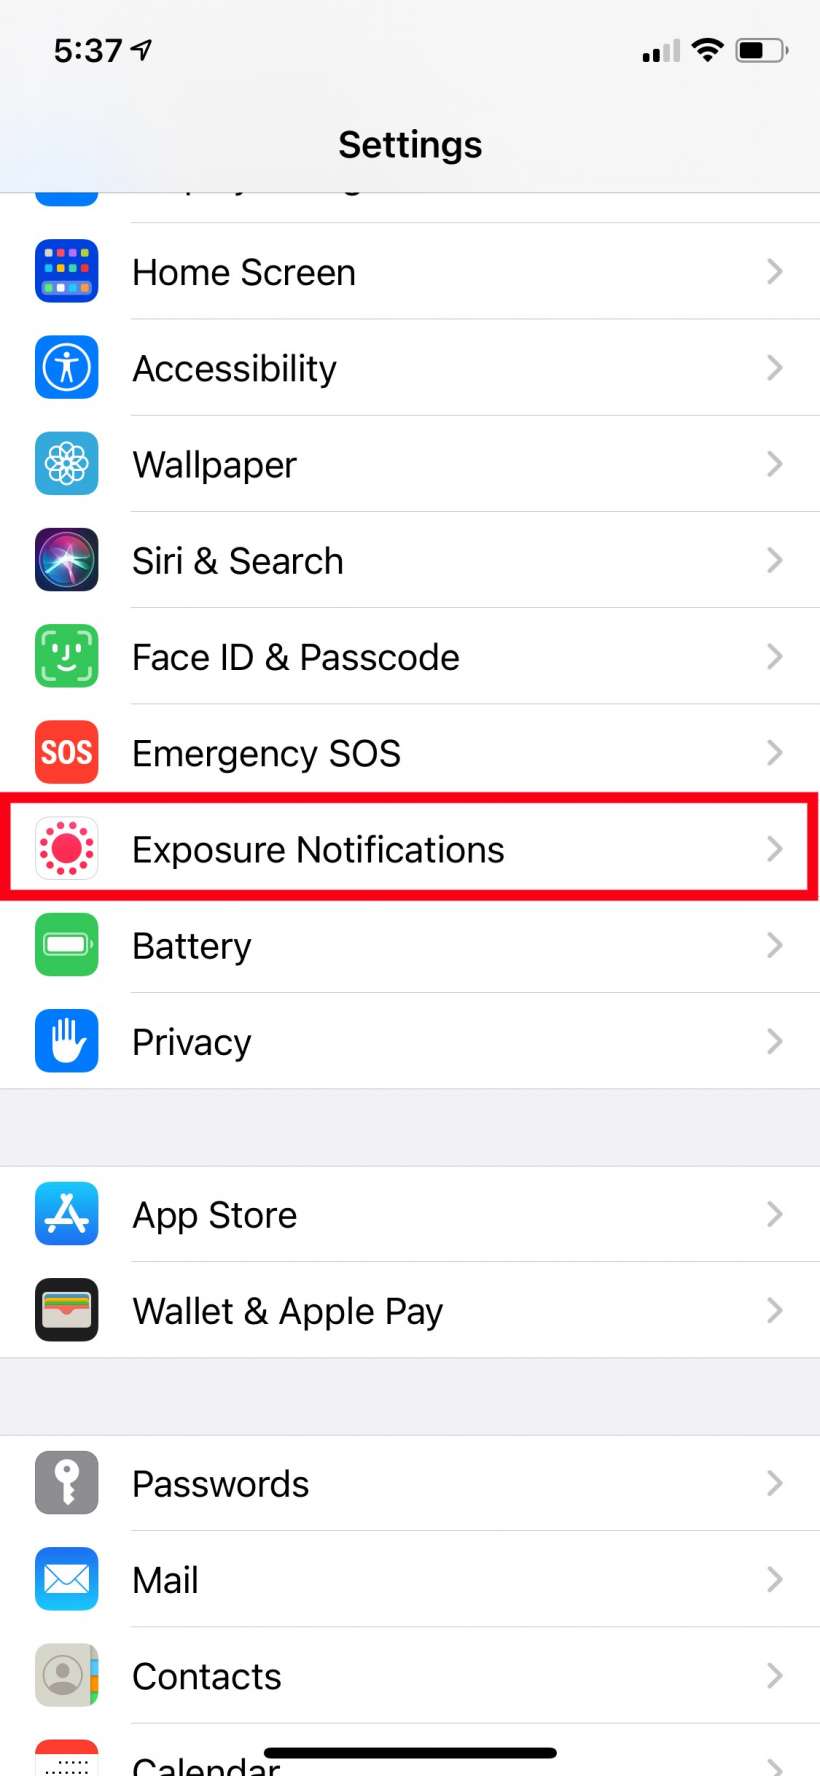 How to check if COVID-19 Exposure Notifications are available in your area, country, state or province on iPhone and iPad.